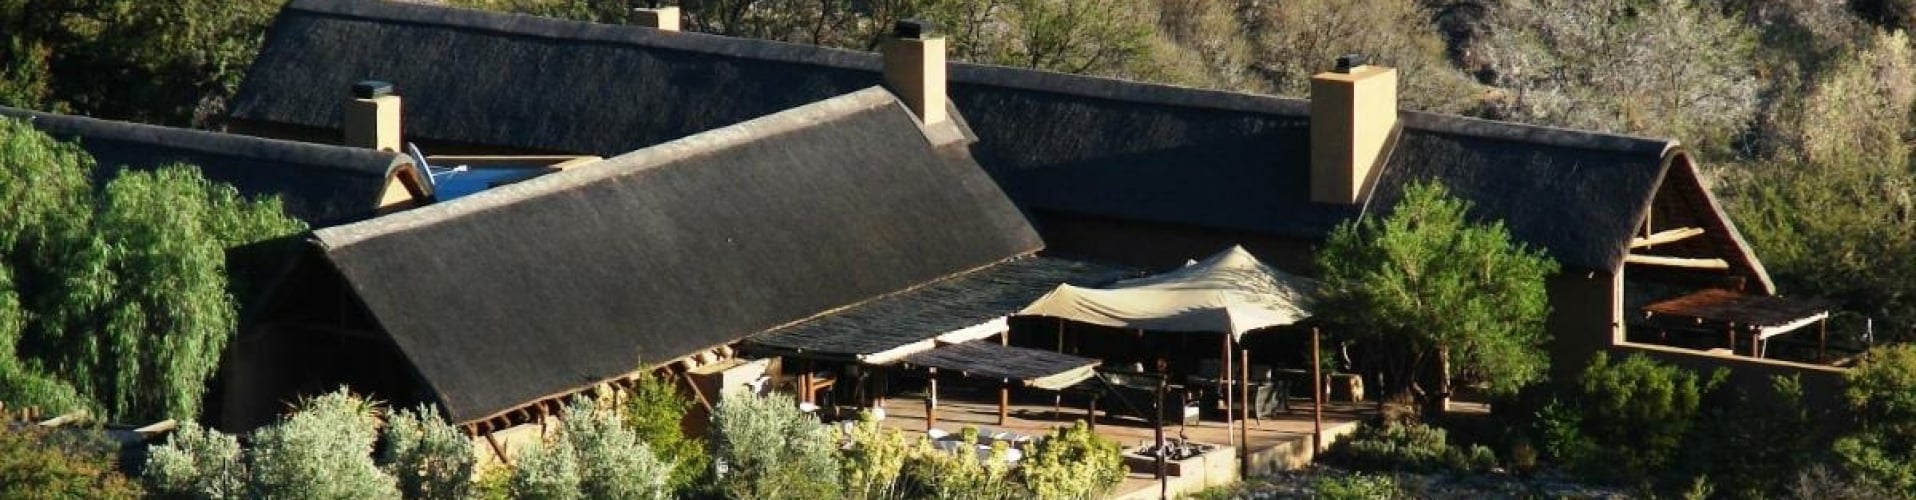 bosch-luys-kloof-klein-karoo-aerial-overview-of-main-lodge